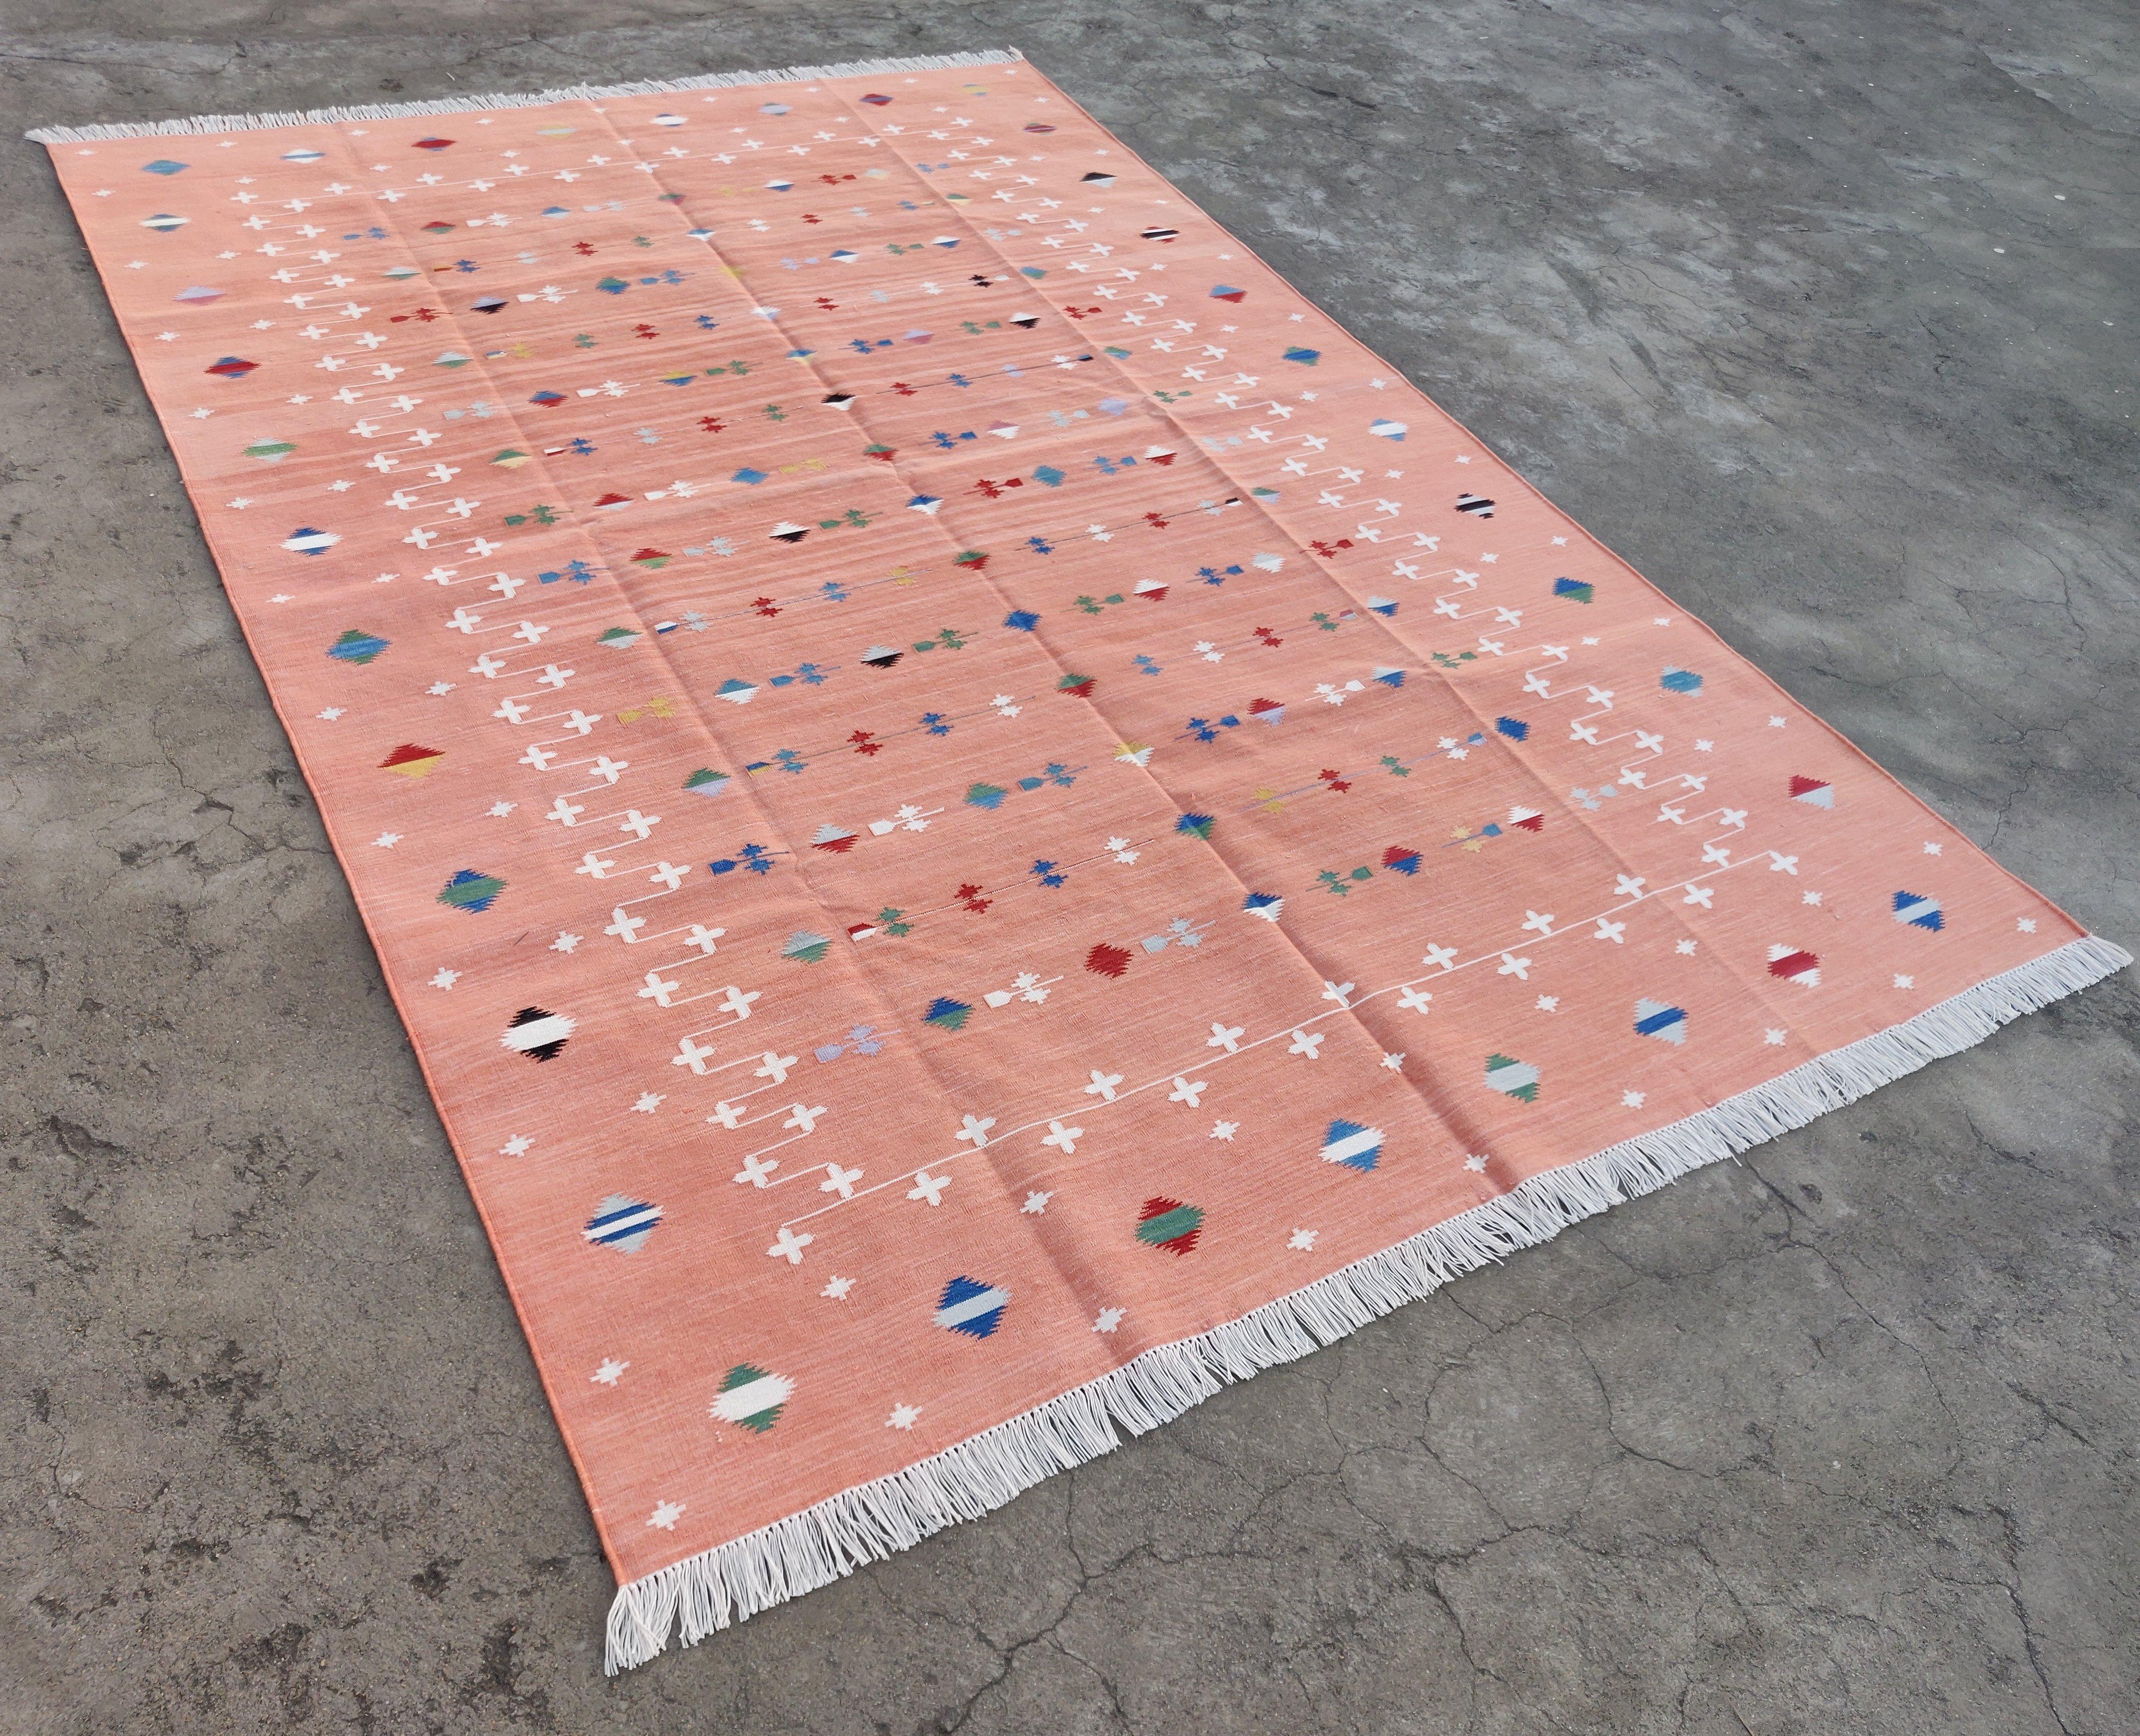 Mid-Century Modern Handmade Cotton Area Flat Weave Rug, 6x9 Pink And White Shooting Star Dhurrie For Sale